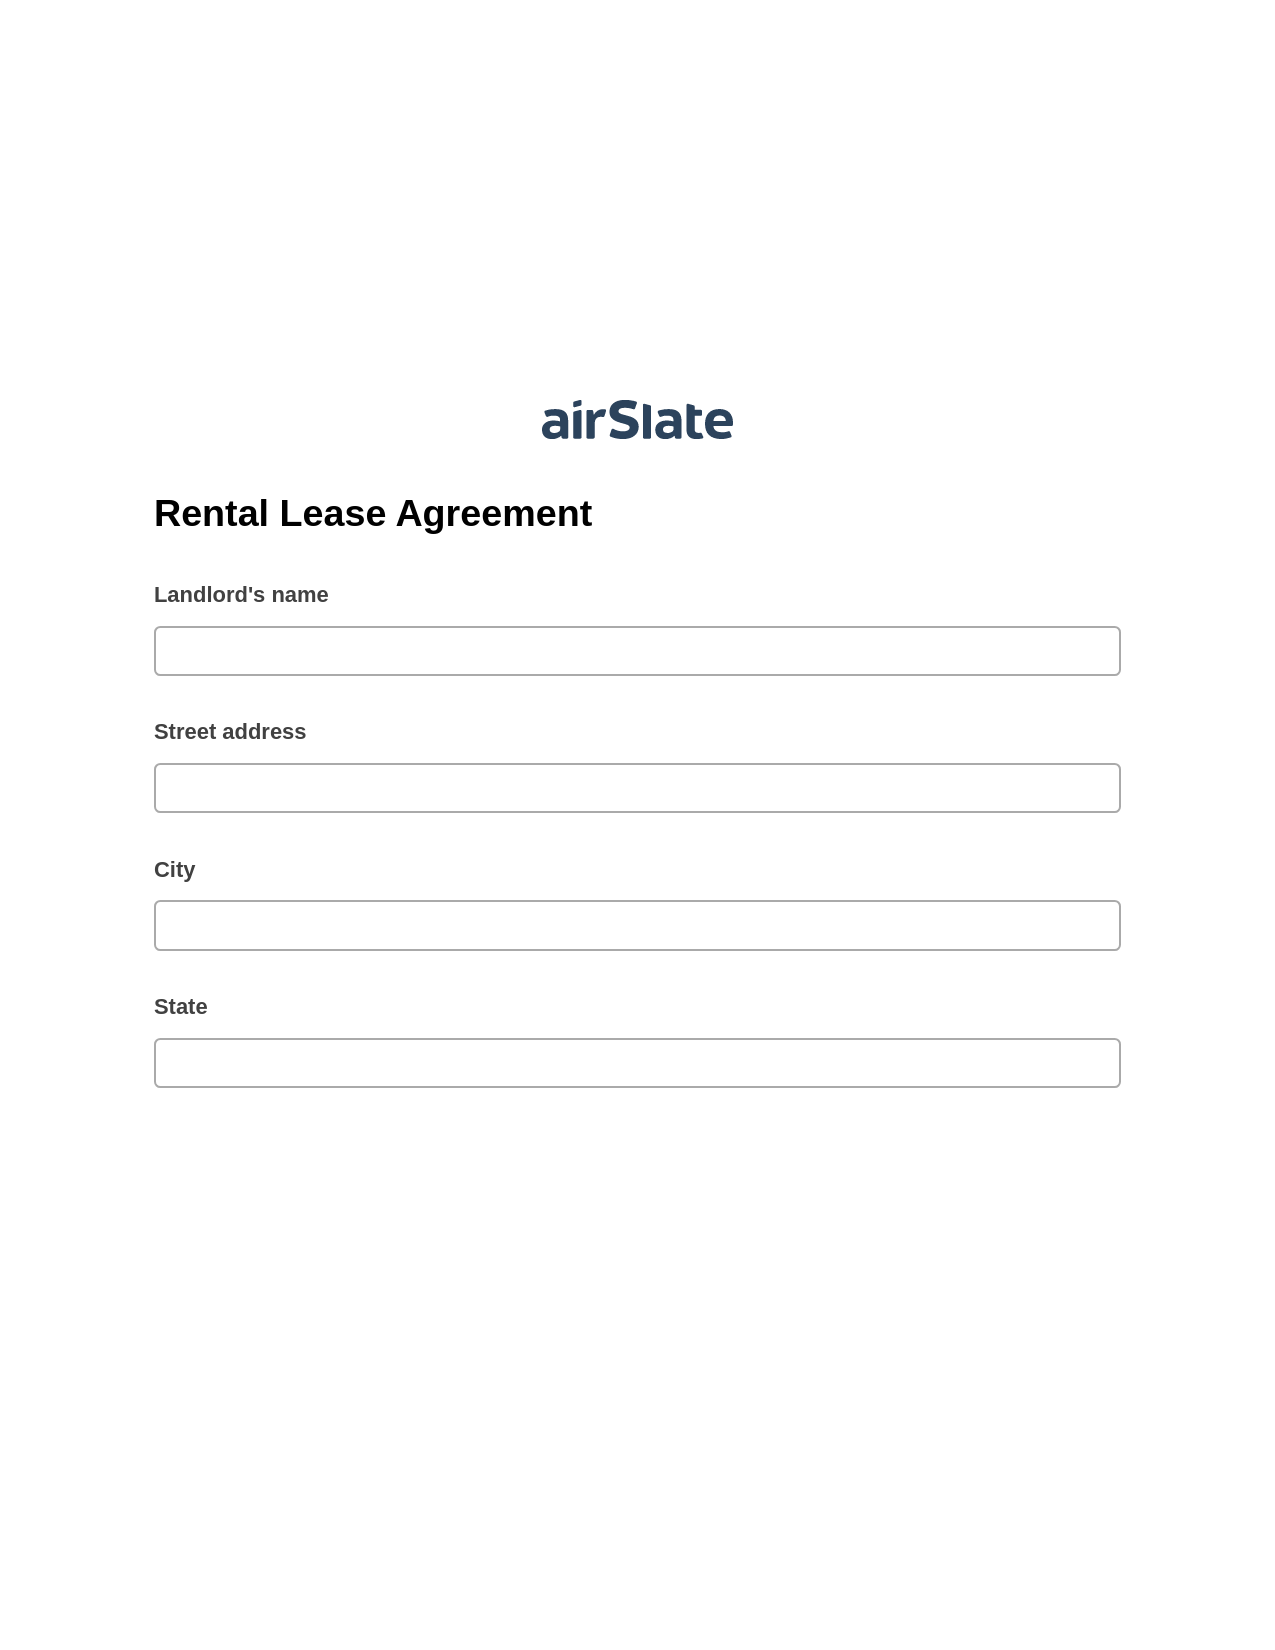 Rental Lease Agreement Pre-fill from Google Sheets Bot, Document Hide Bot, Google Drive Bot